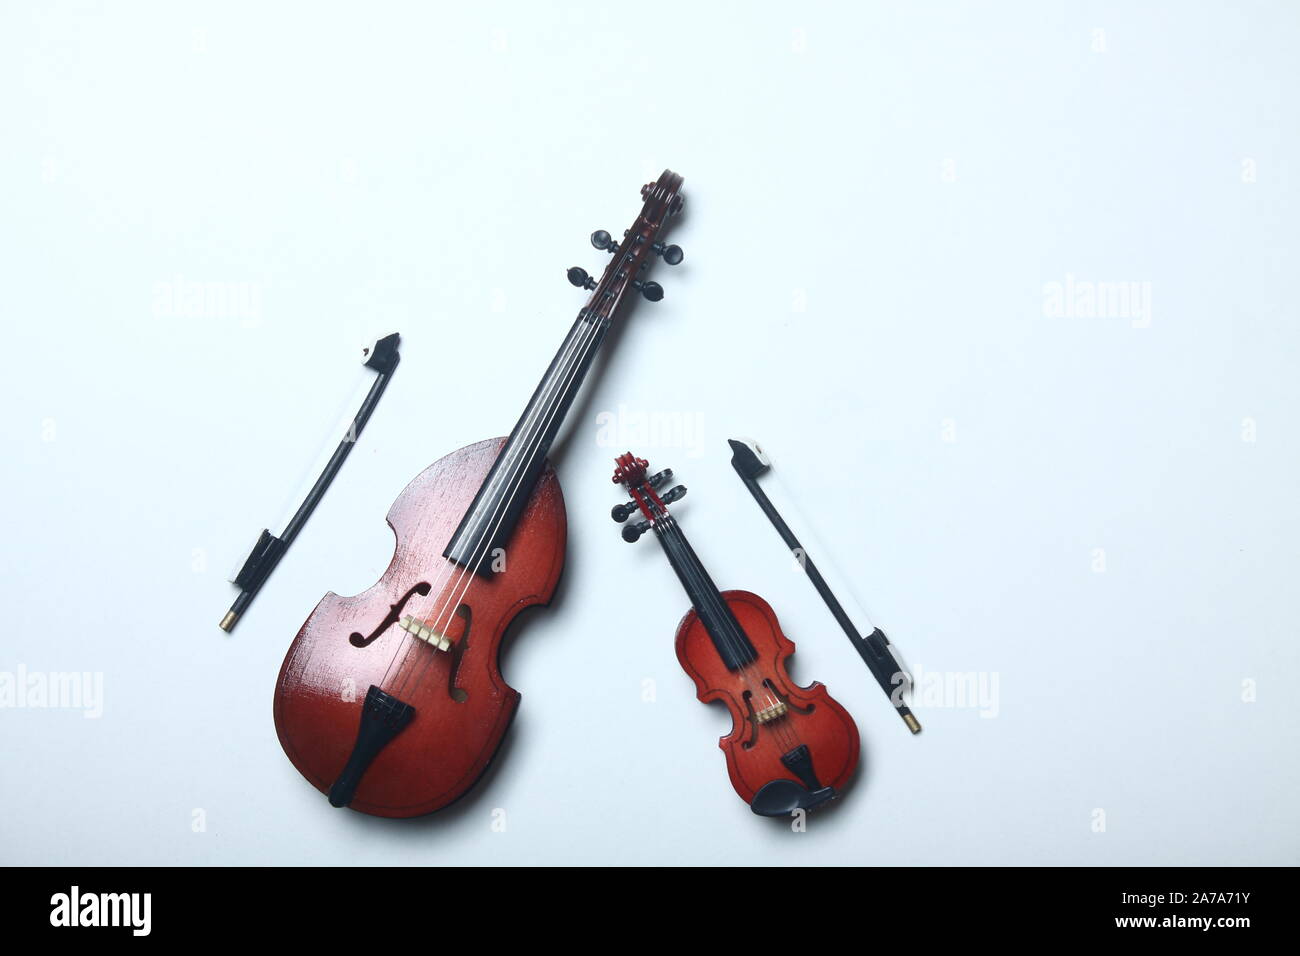 violin and bass-viol on white background Stock Photo